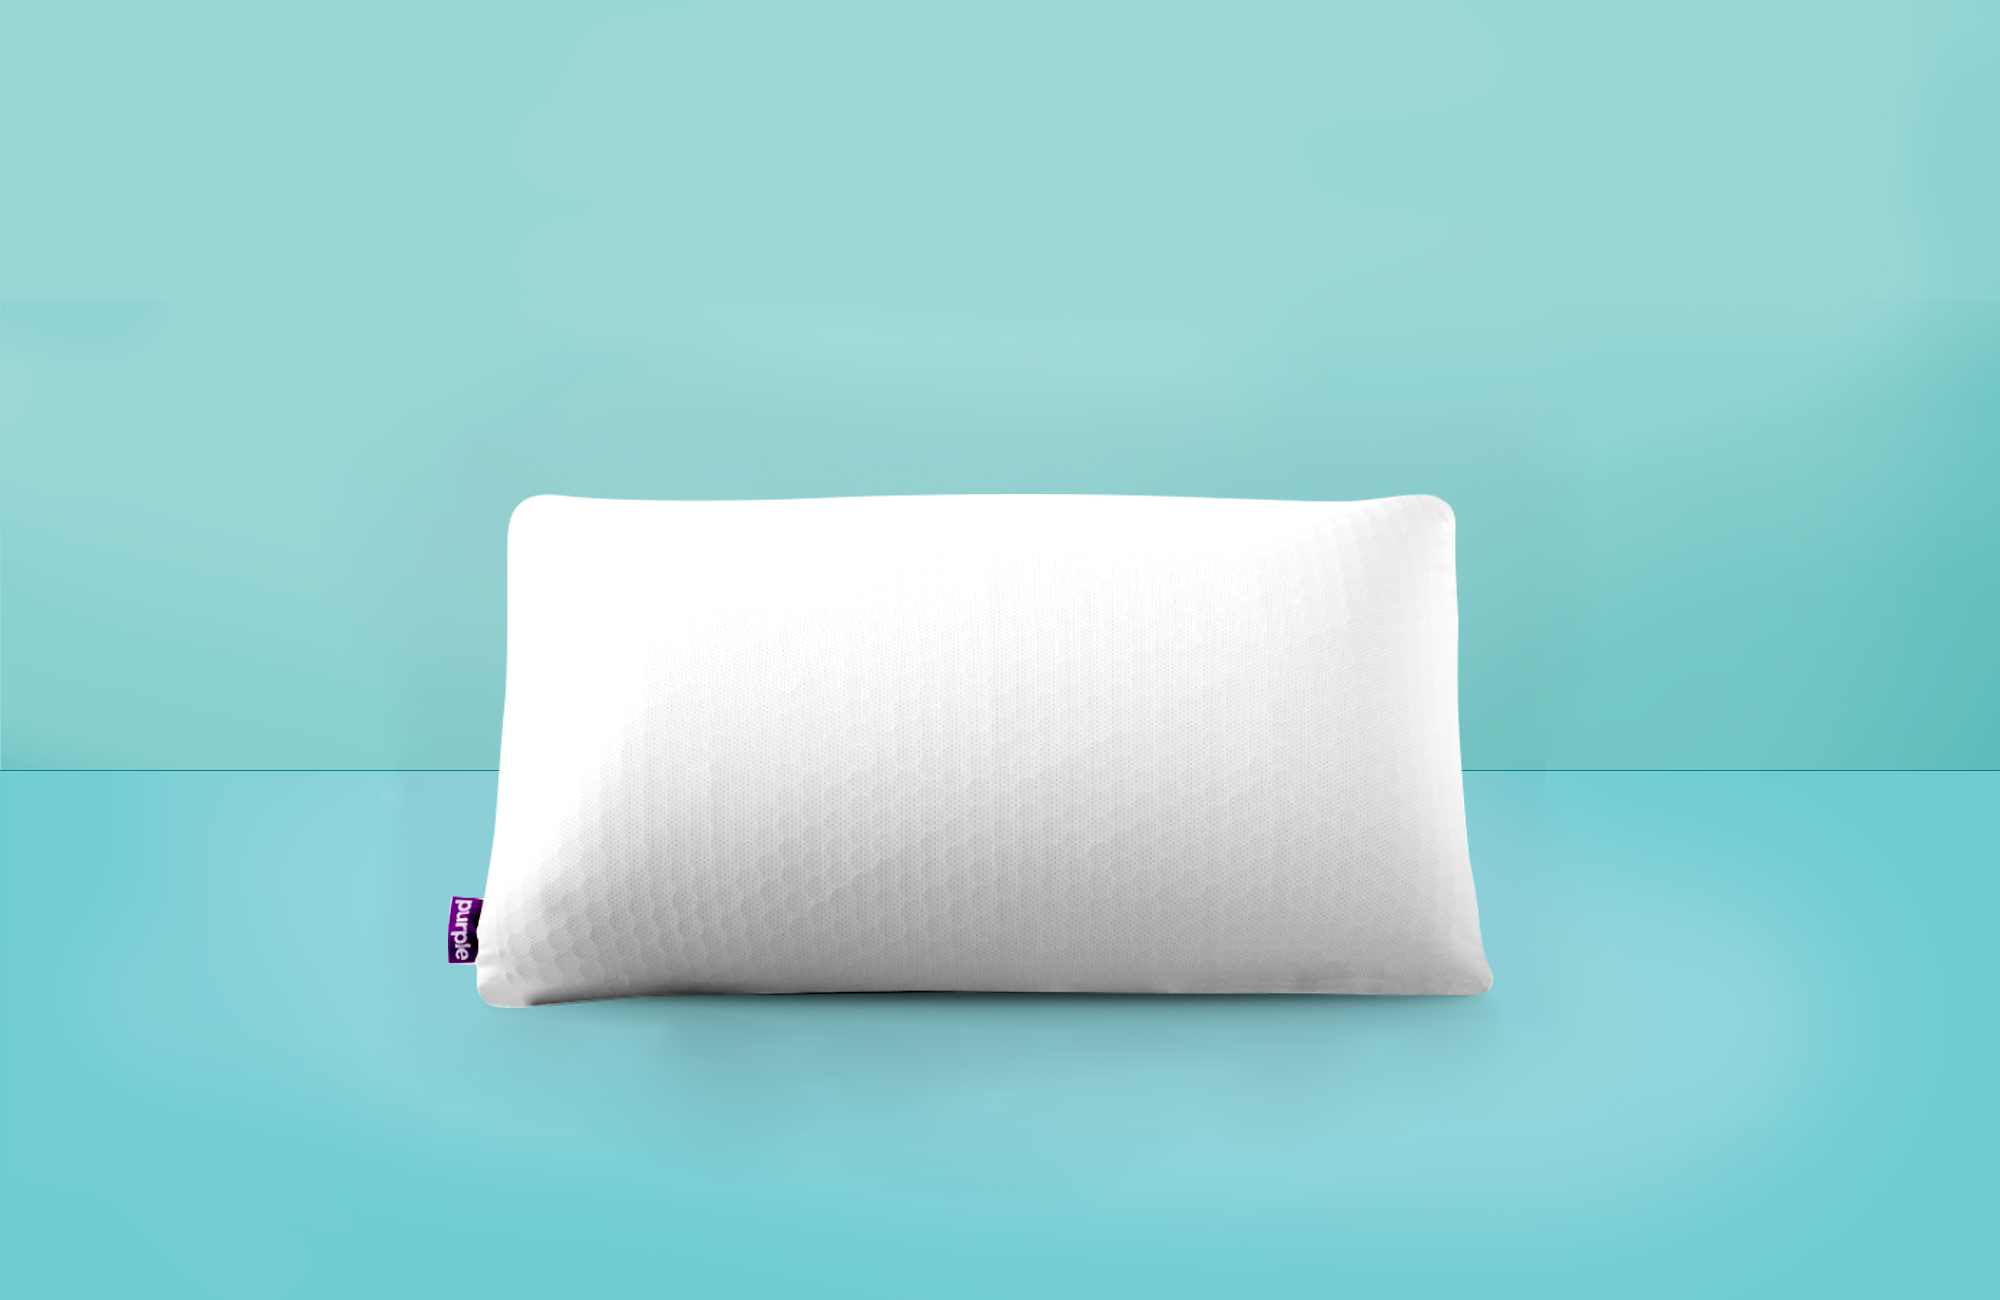 Pillow Stuffing for Latex, Memory Foam and More